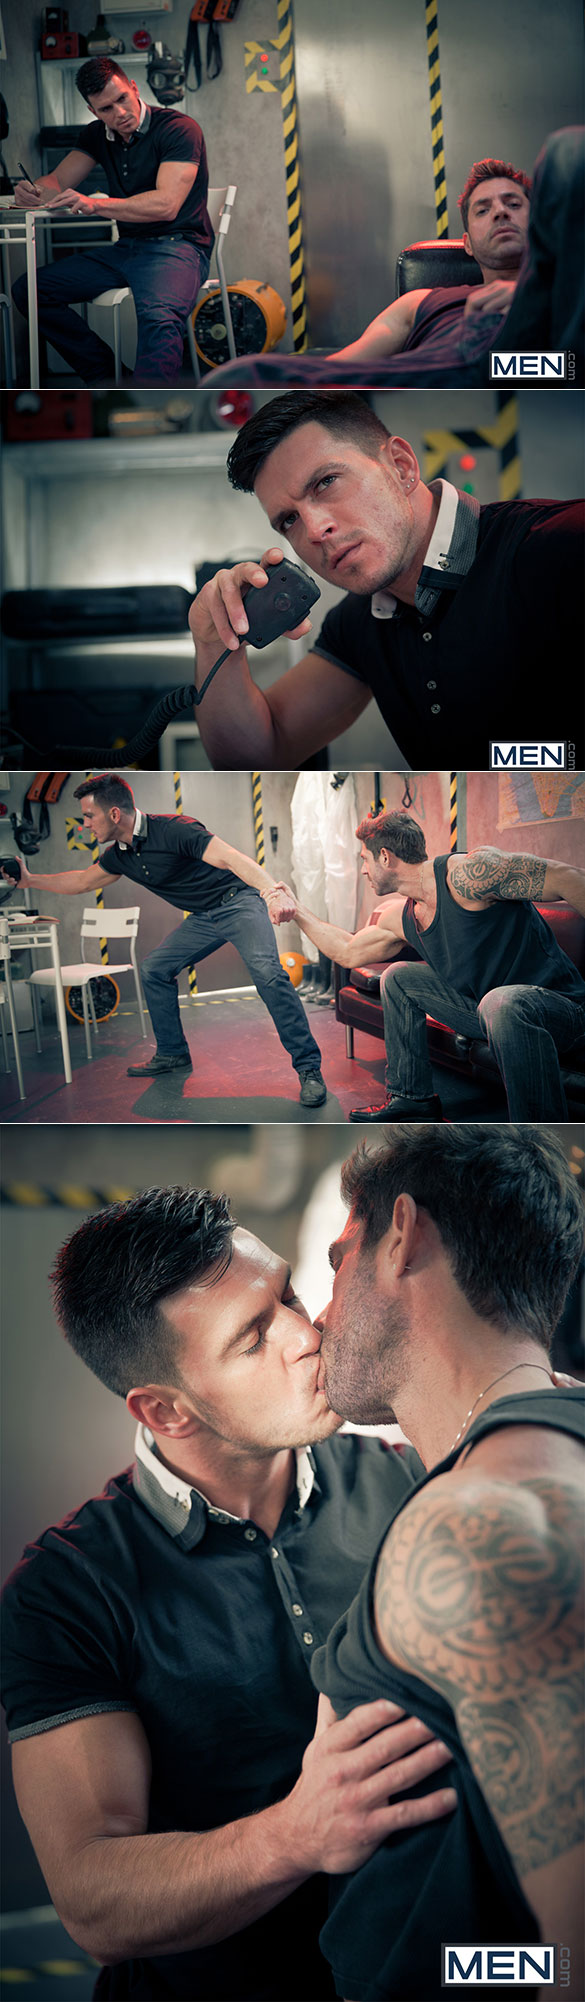 Men.com: Paddy O'Brian pounds Axel Brooks in “The End, Part 3”